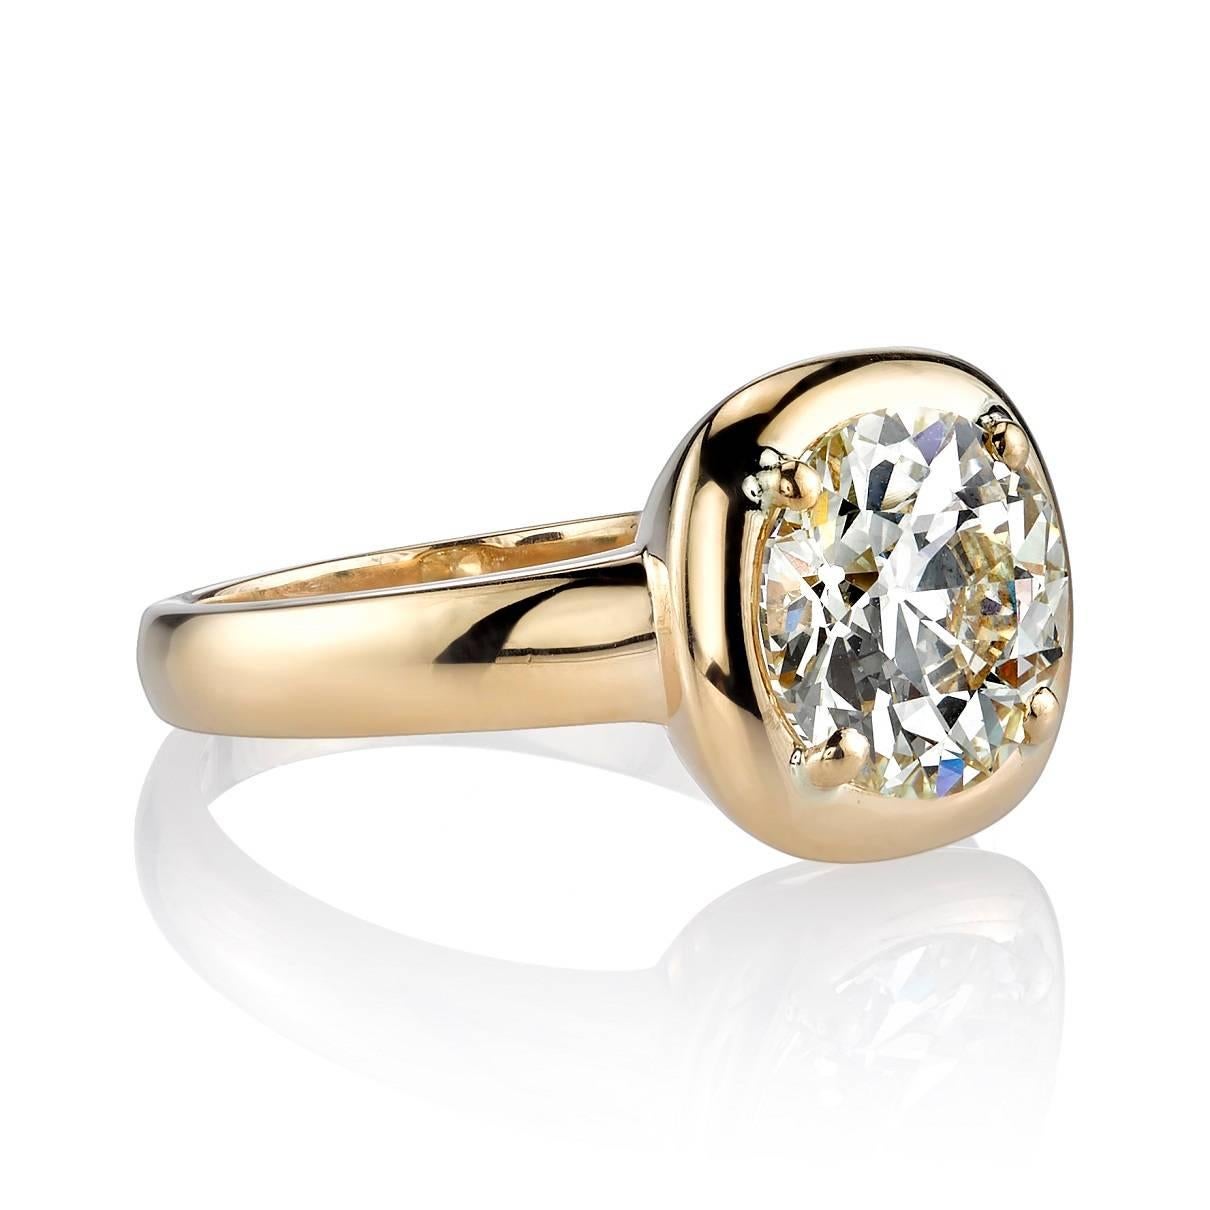 2.48ct M/VVS2 old European cut diamond EGL certified and set in a handcrafted 18k yellow gold mounting.  Smooth lines and bold metal give this ring a contemporary yet classic look.